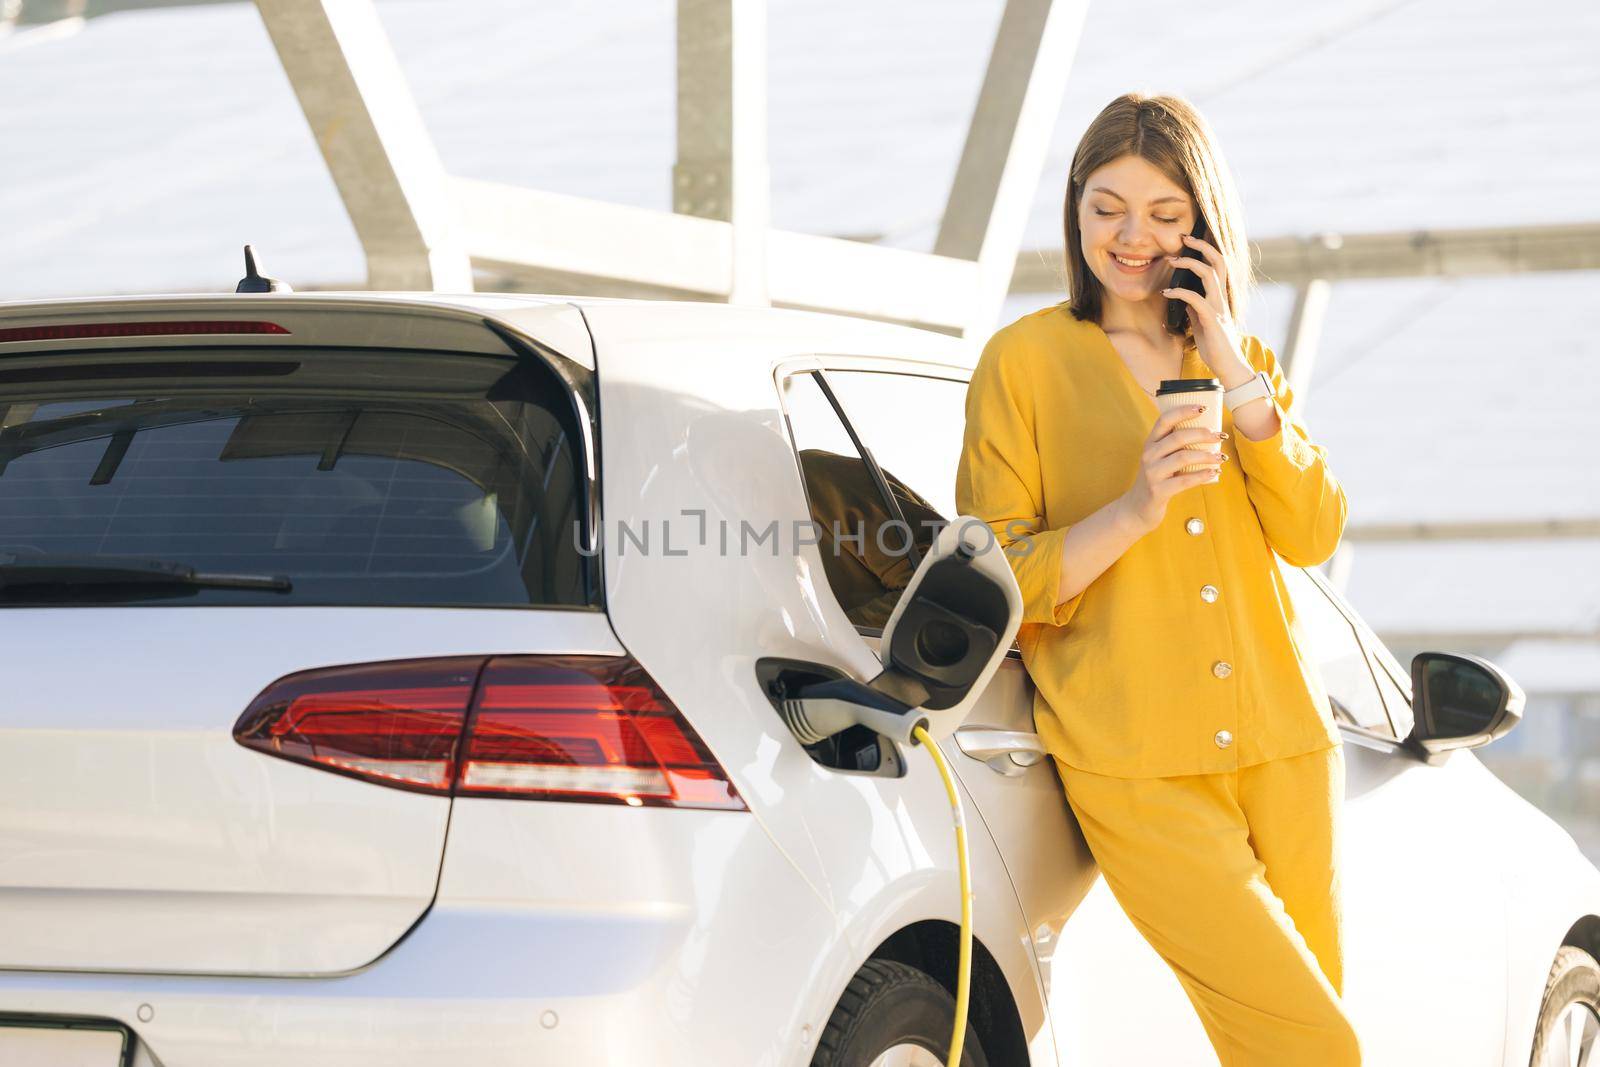 Attractive business woman taking phone call standing near her electric car. Positive woman have talking conversation by phone near her electric car and waits when the vehicle will be charged.